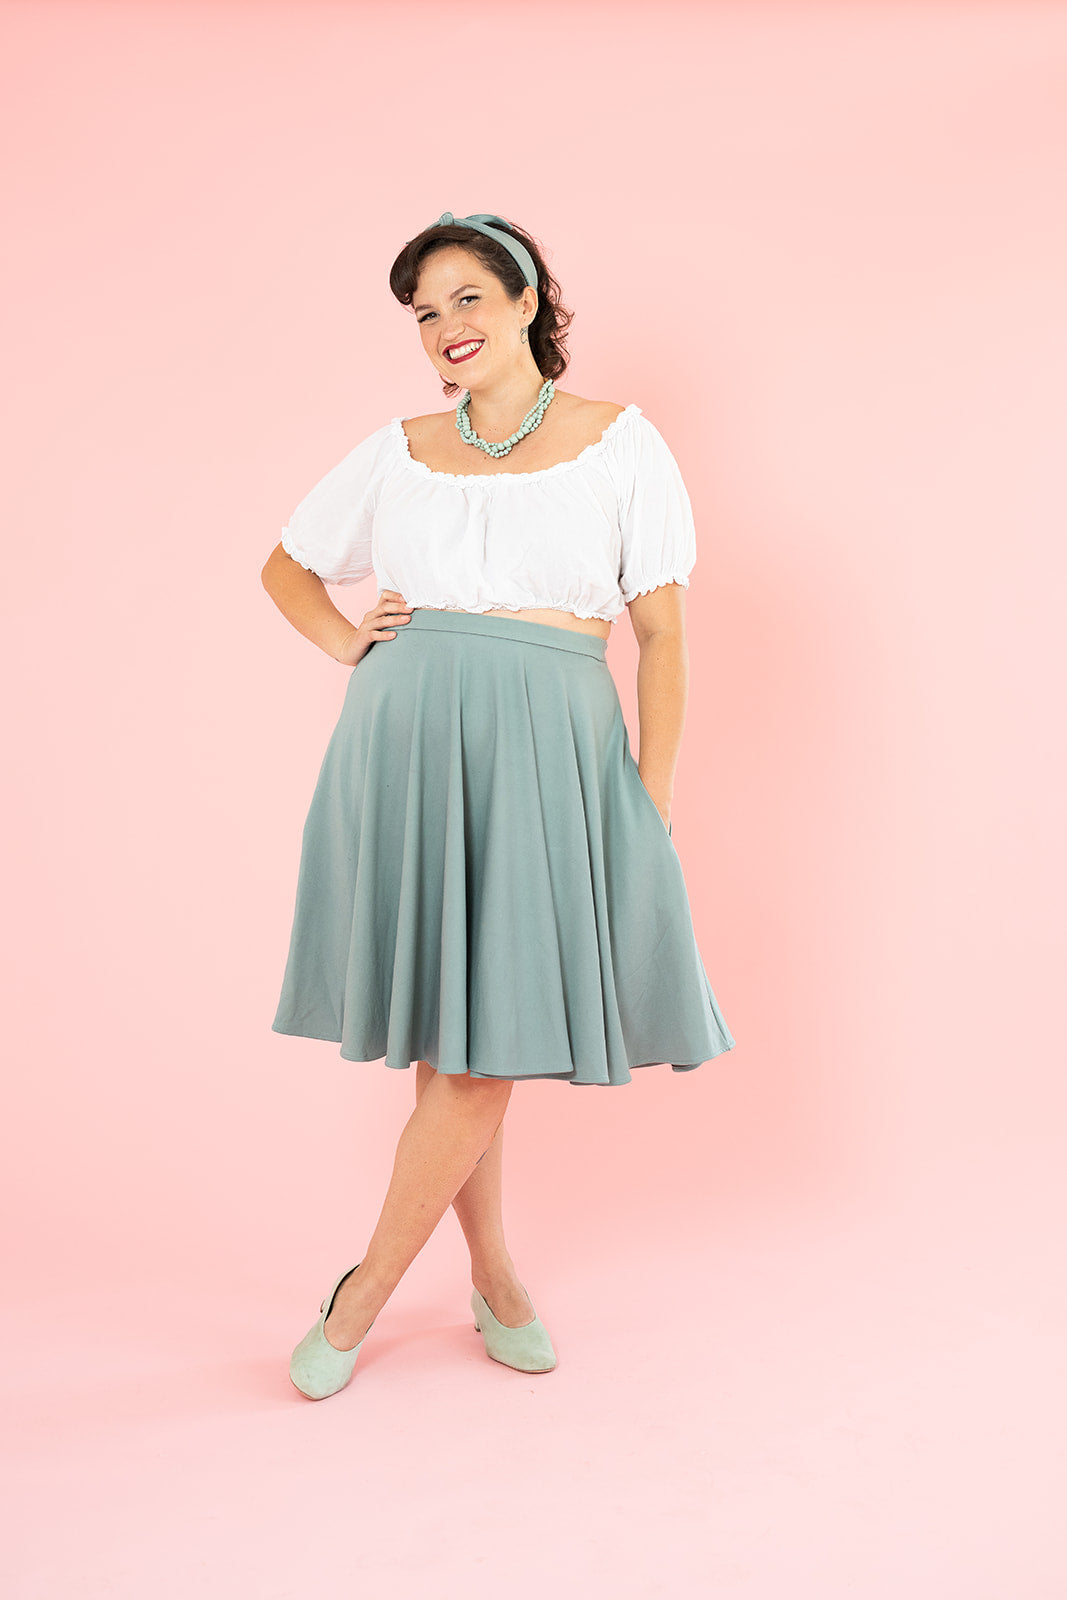 A smiling young white woman with dark brown hair wearing a white top and a flowy vintage-inspired mint skirt.